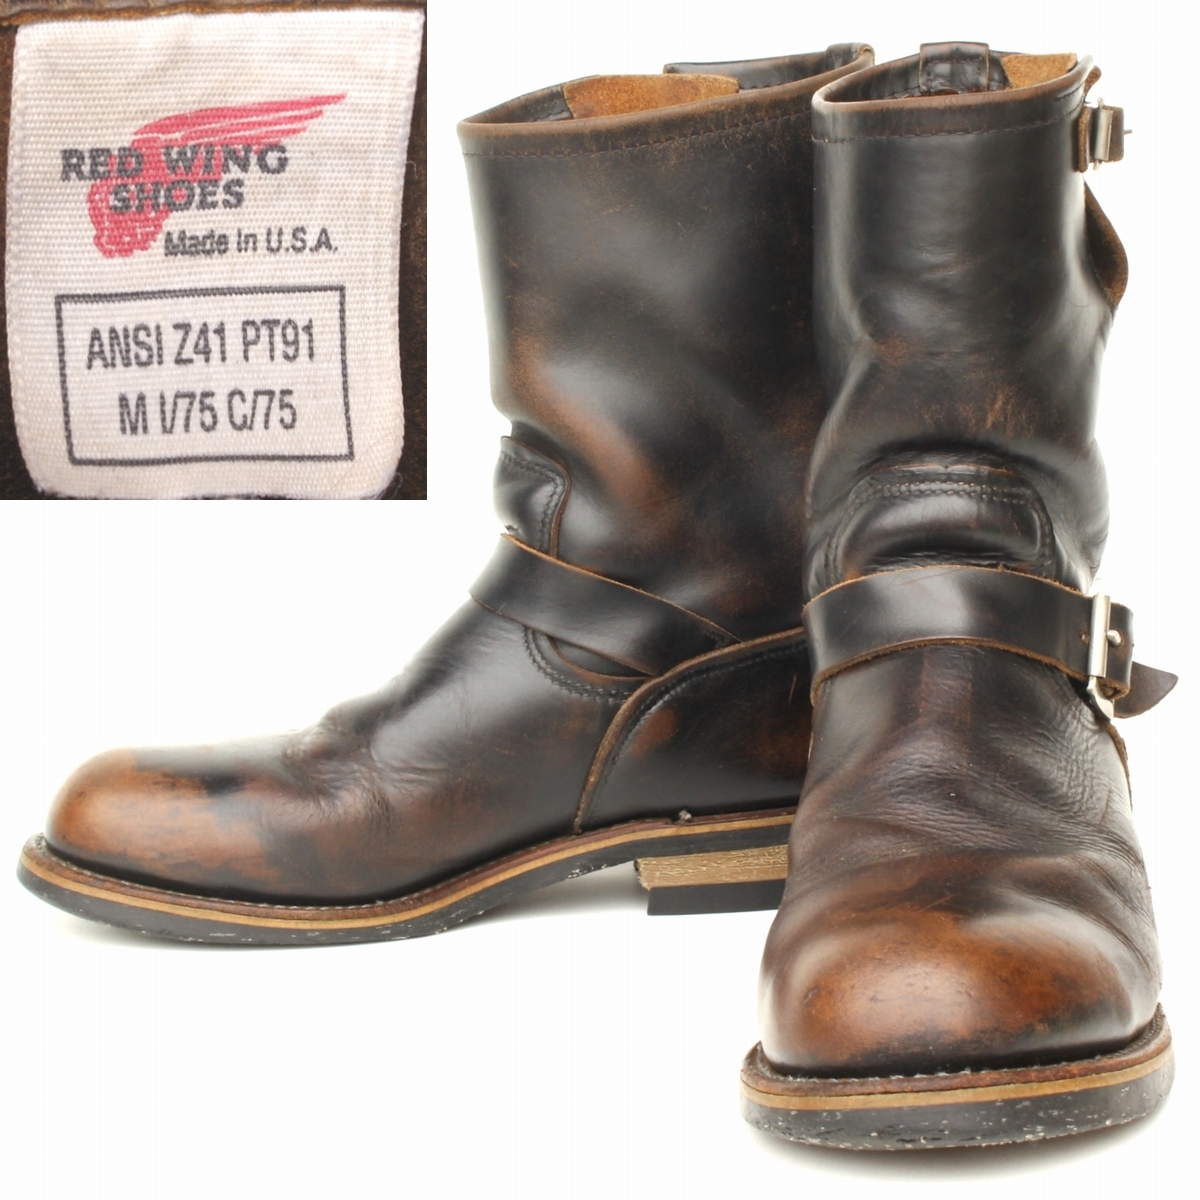 (96008) finest quality tea core REDWING2268 Red Wing 9.5D approximately 27.5cm ( old print feather tag PT91 tea core black 94-96 year about made engineer boots black steel tu)